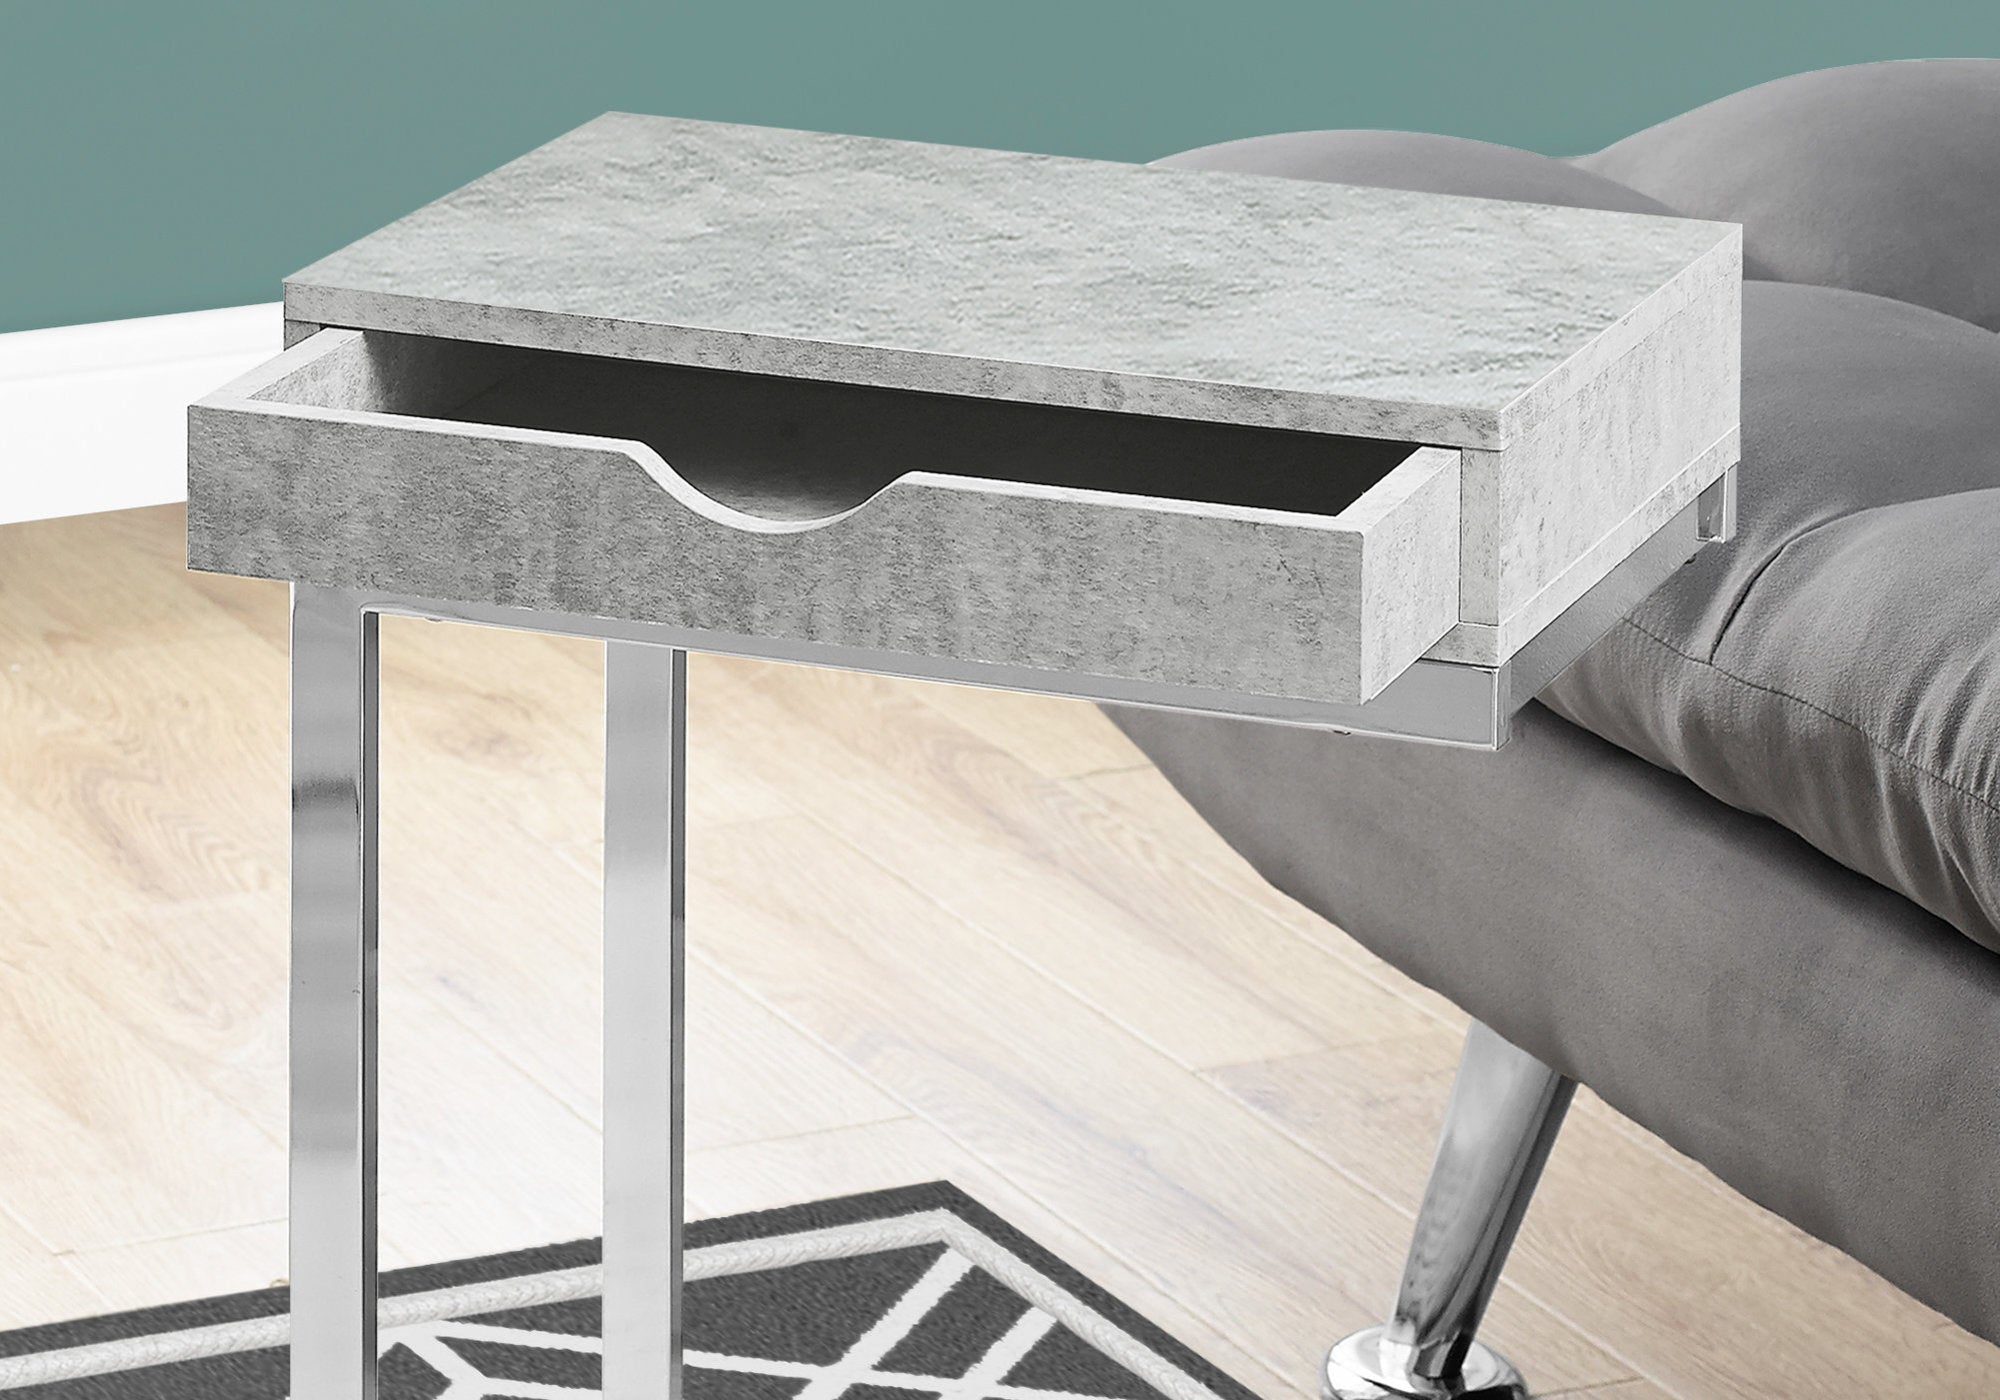 MN-373373    Accent Table, C-Shaped, End, Side, Snack, Living Room, Bedroom, Storage Drawer, Metal Legs, Laminate, Grey Cement Look, Chrome, Contemporary, Modern